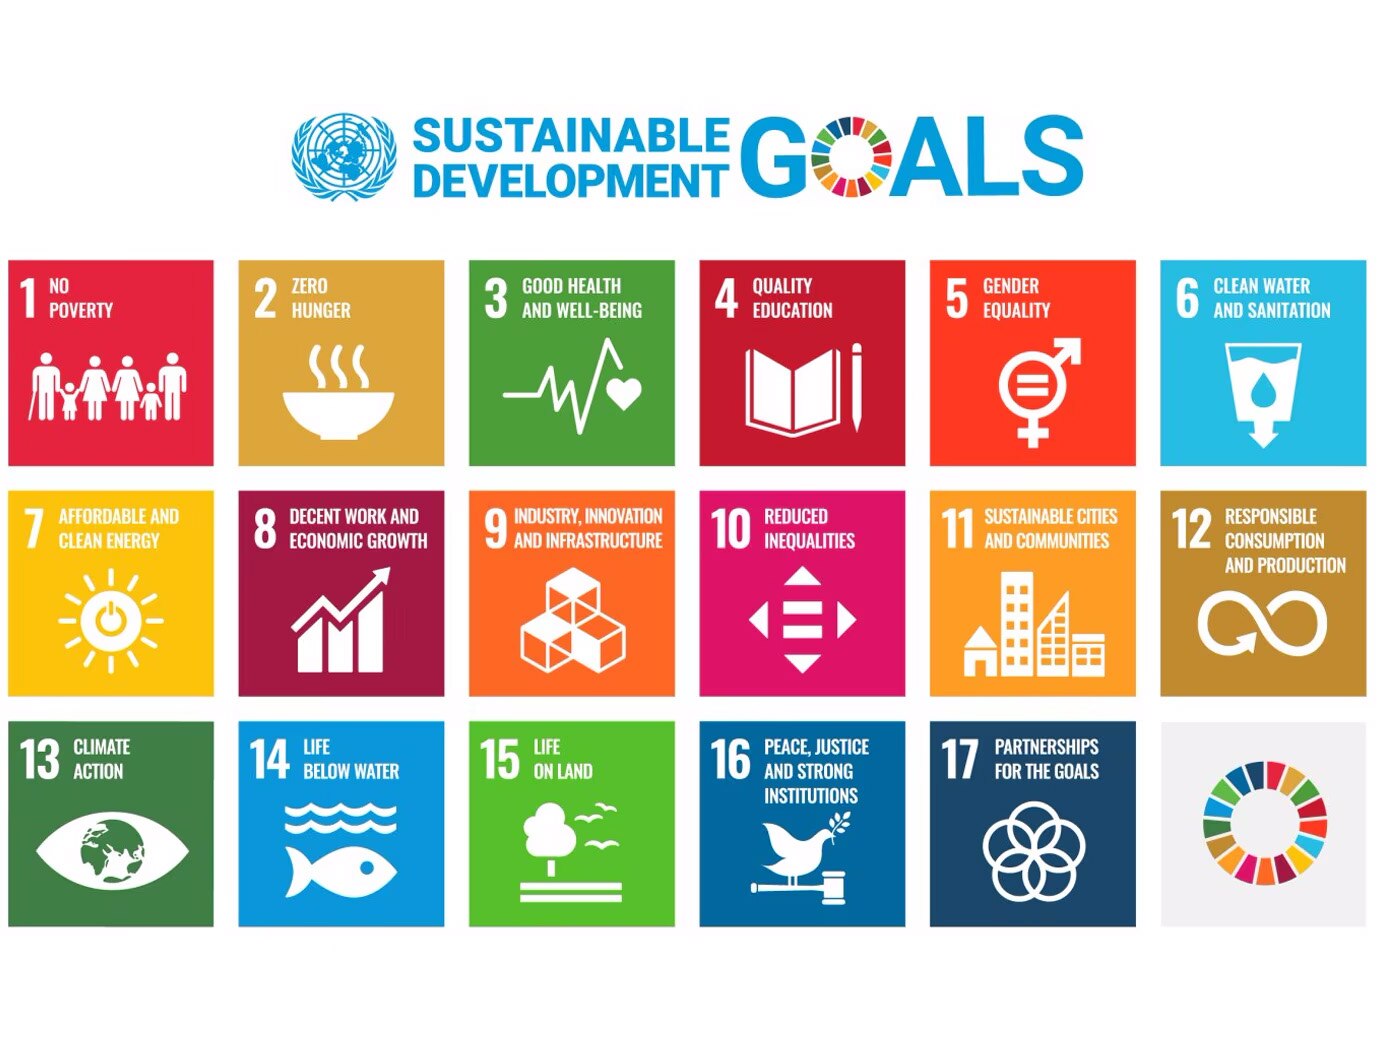 Infographic depicting Sustainable Development Goals of United Nations